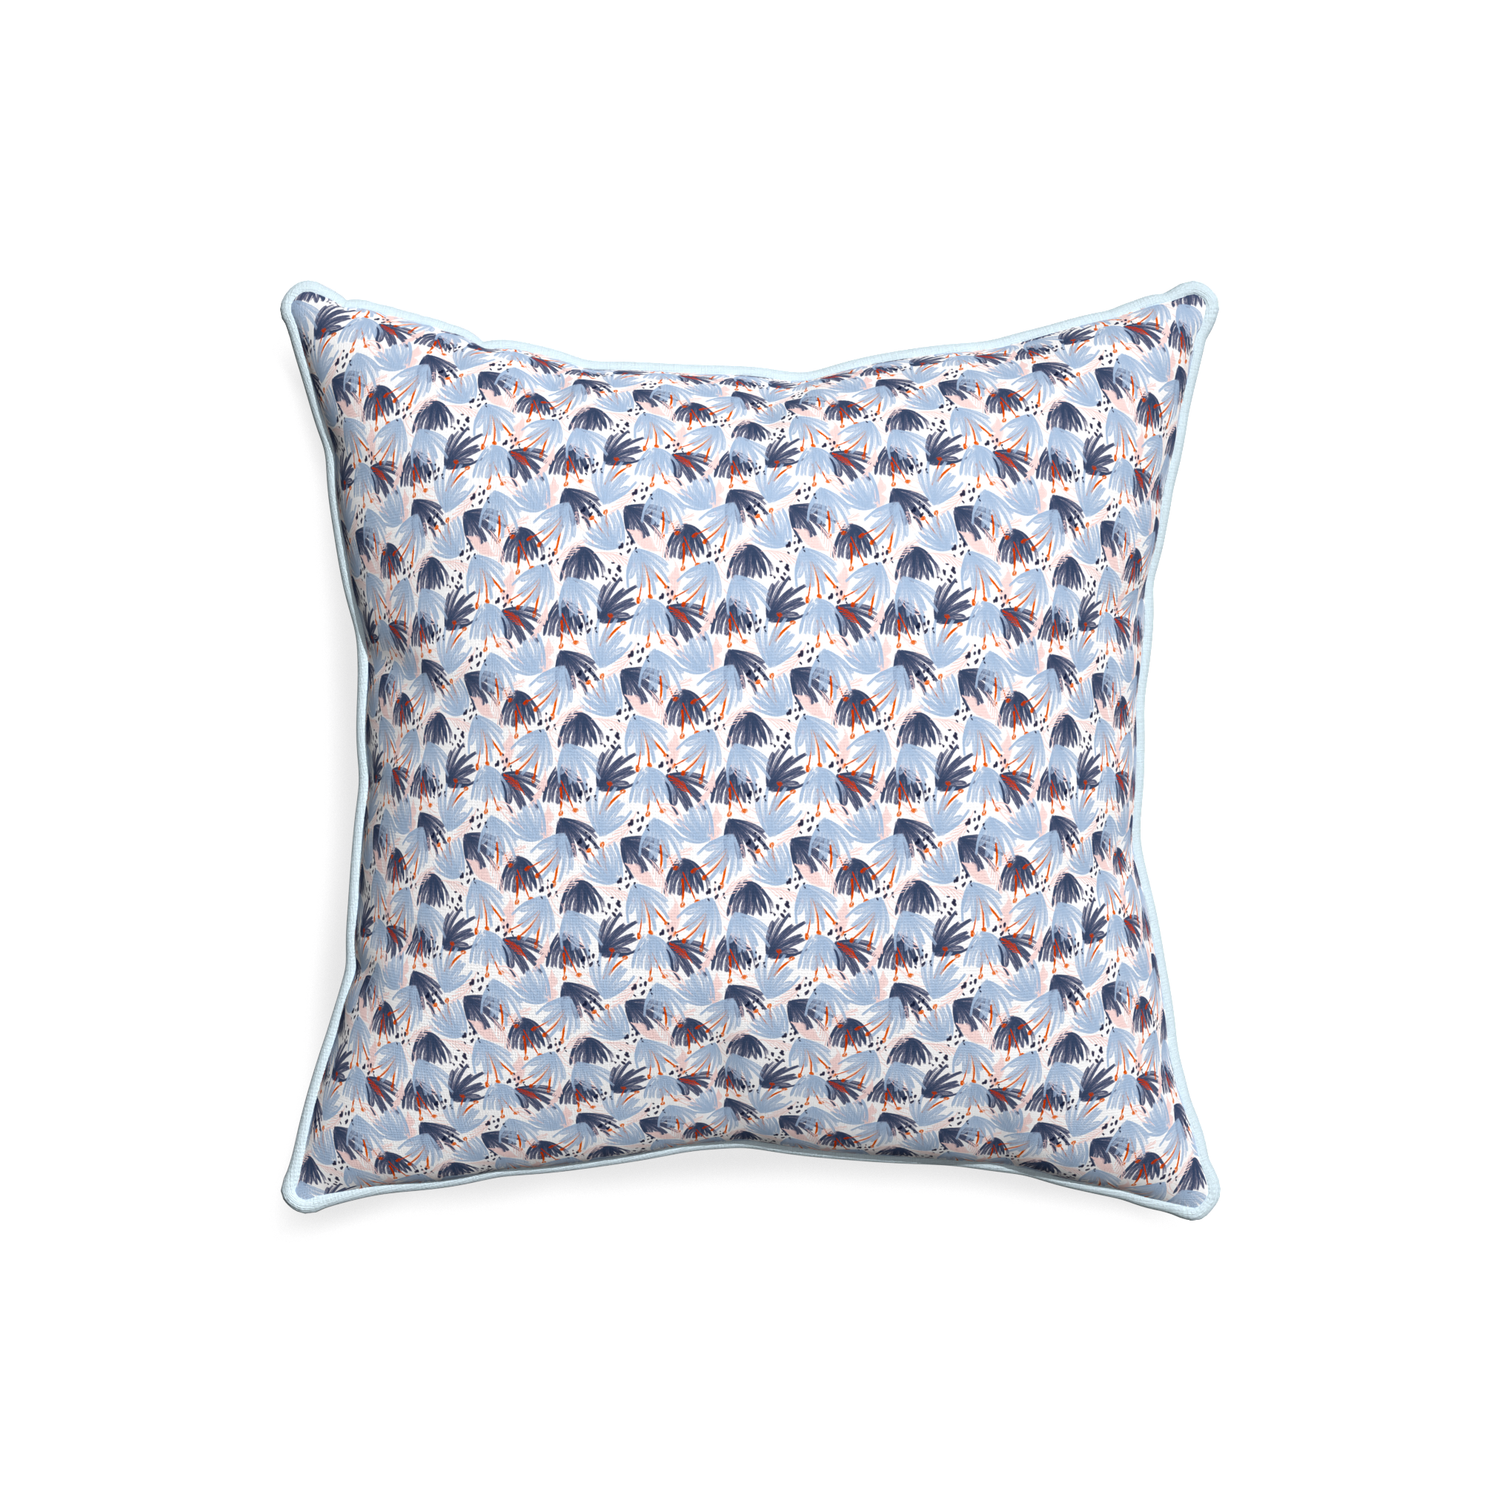 20-square eden blue custom pillow with powder piping on white background